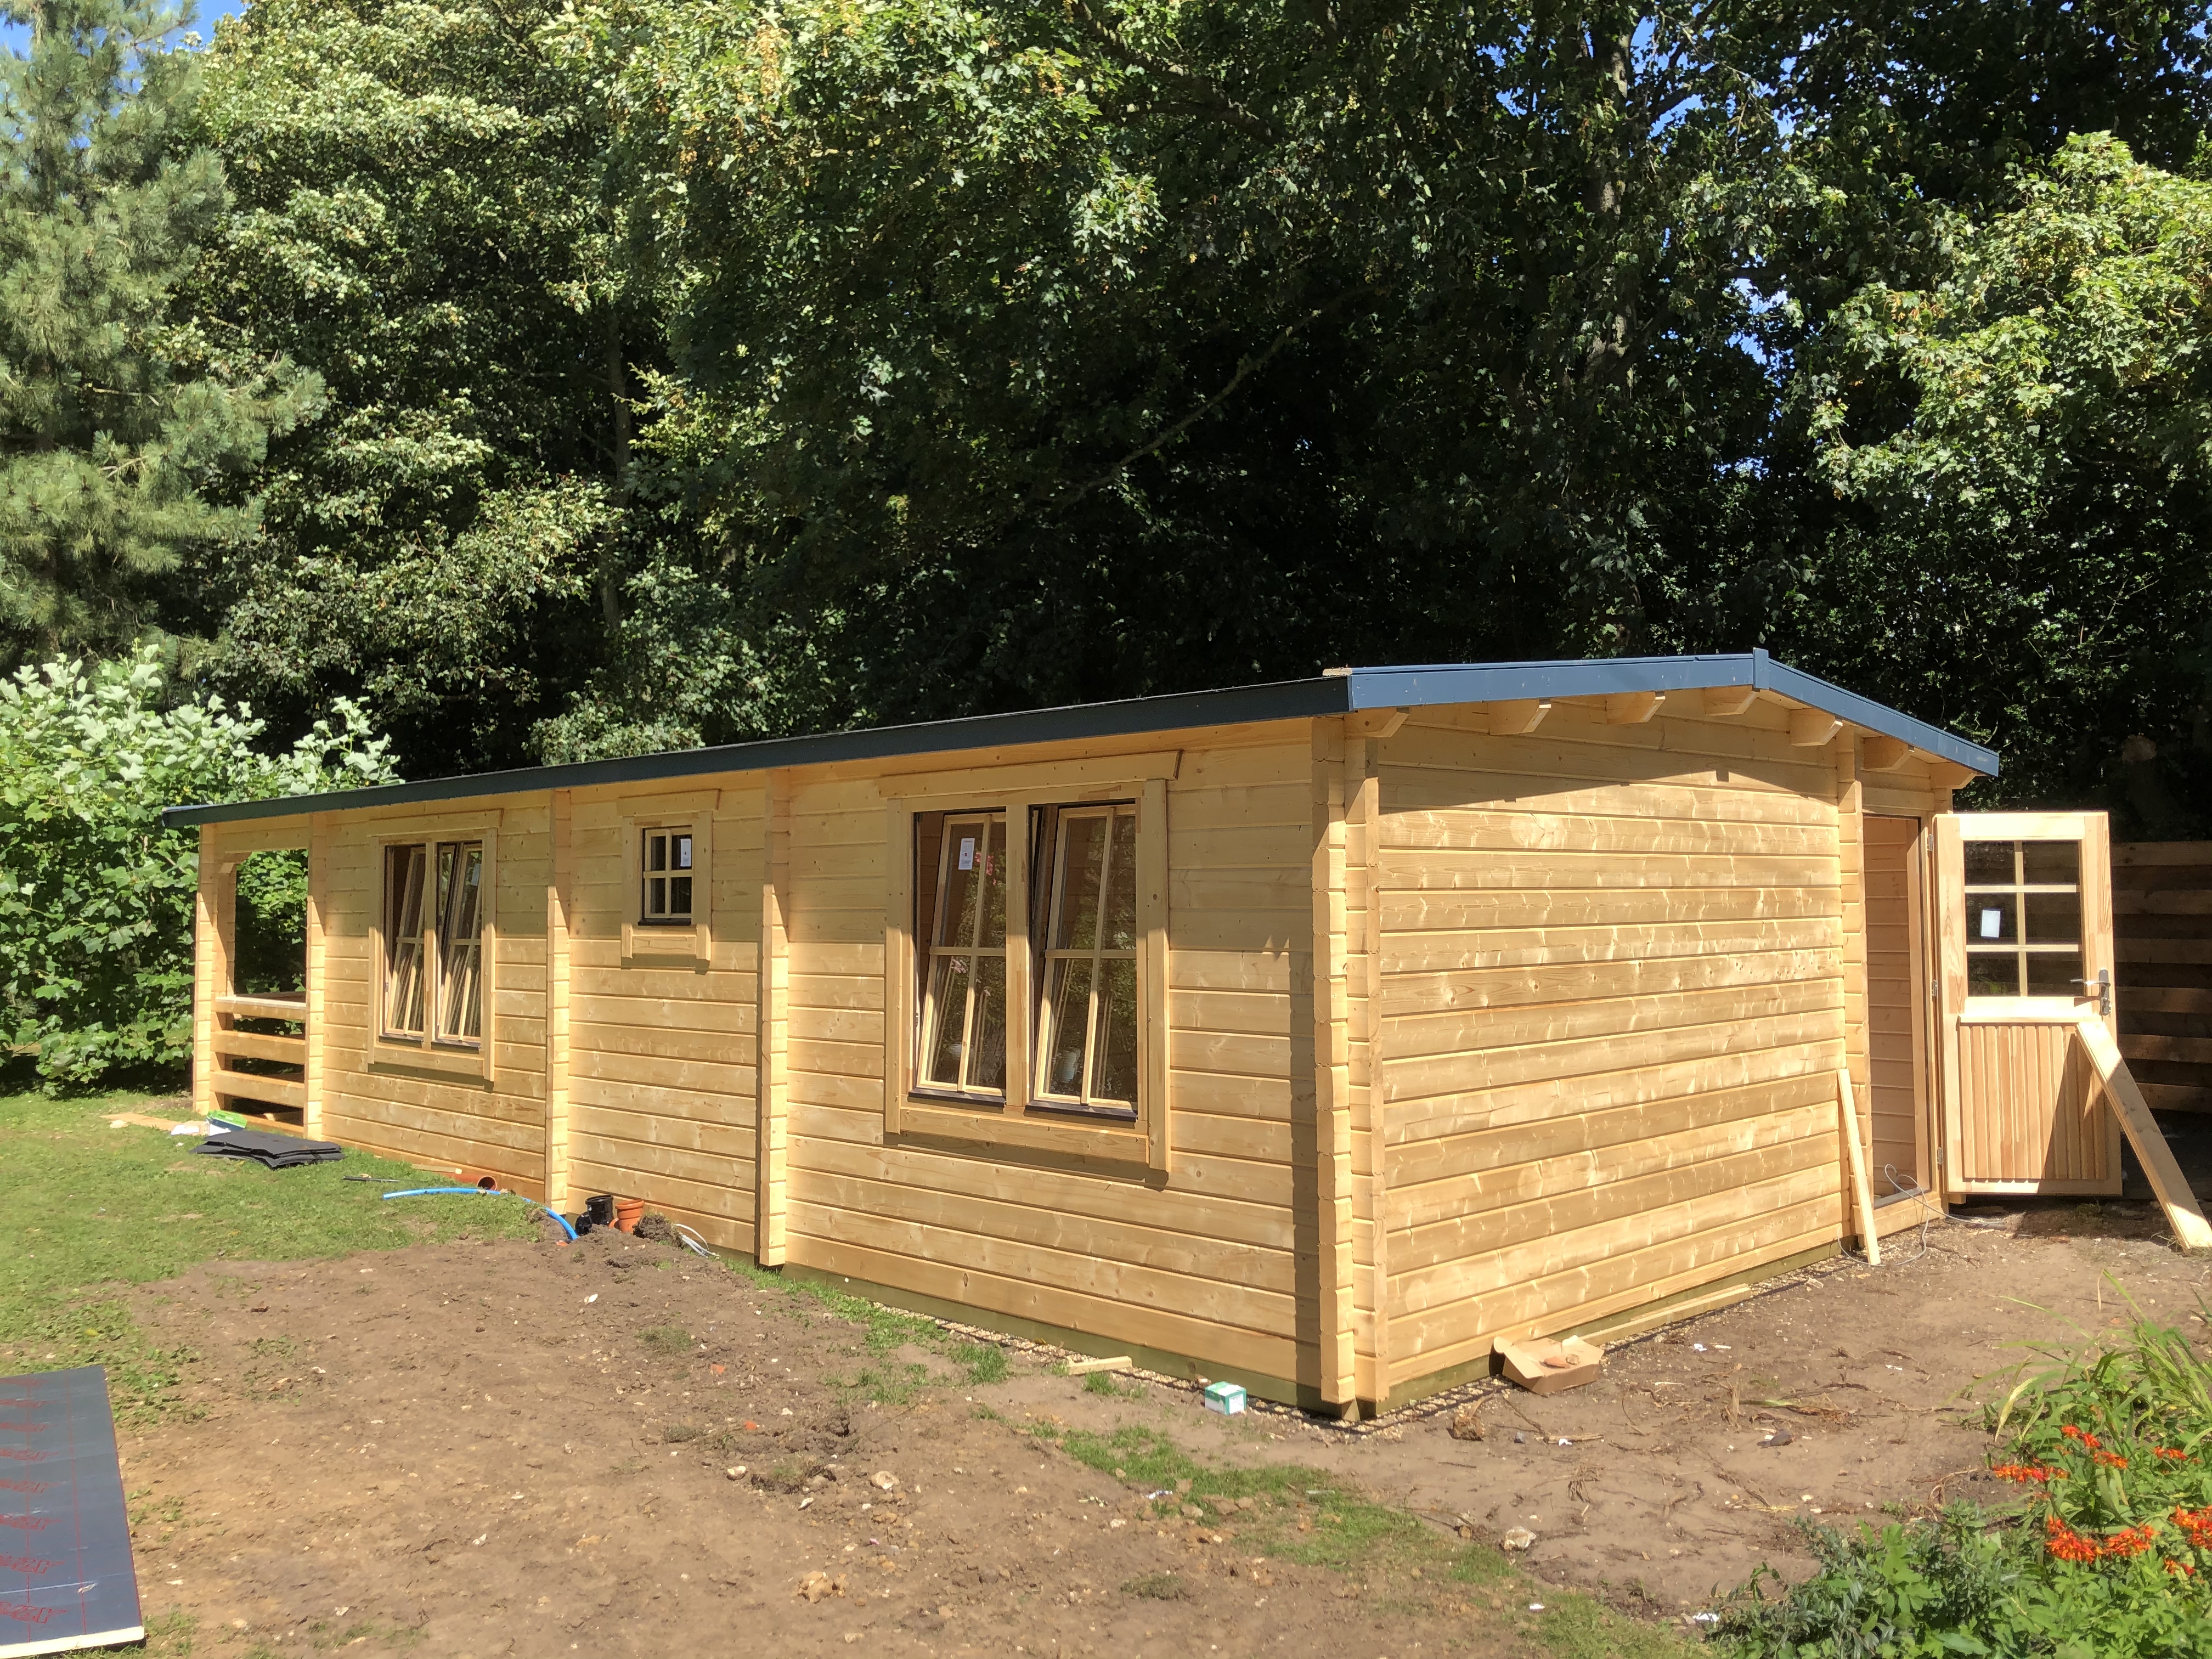 https://www.cabinsunlimited.co.uk/glamping-camping-pods/